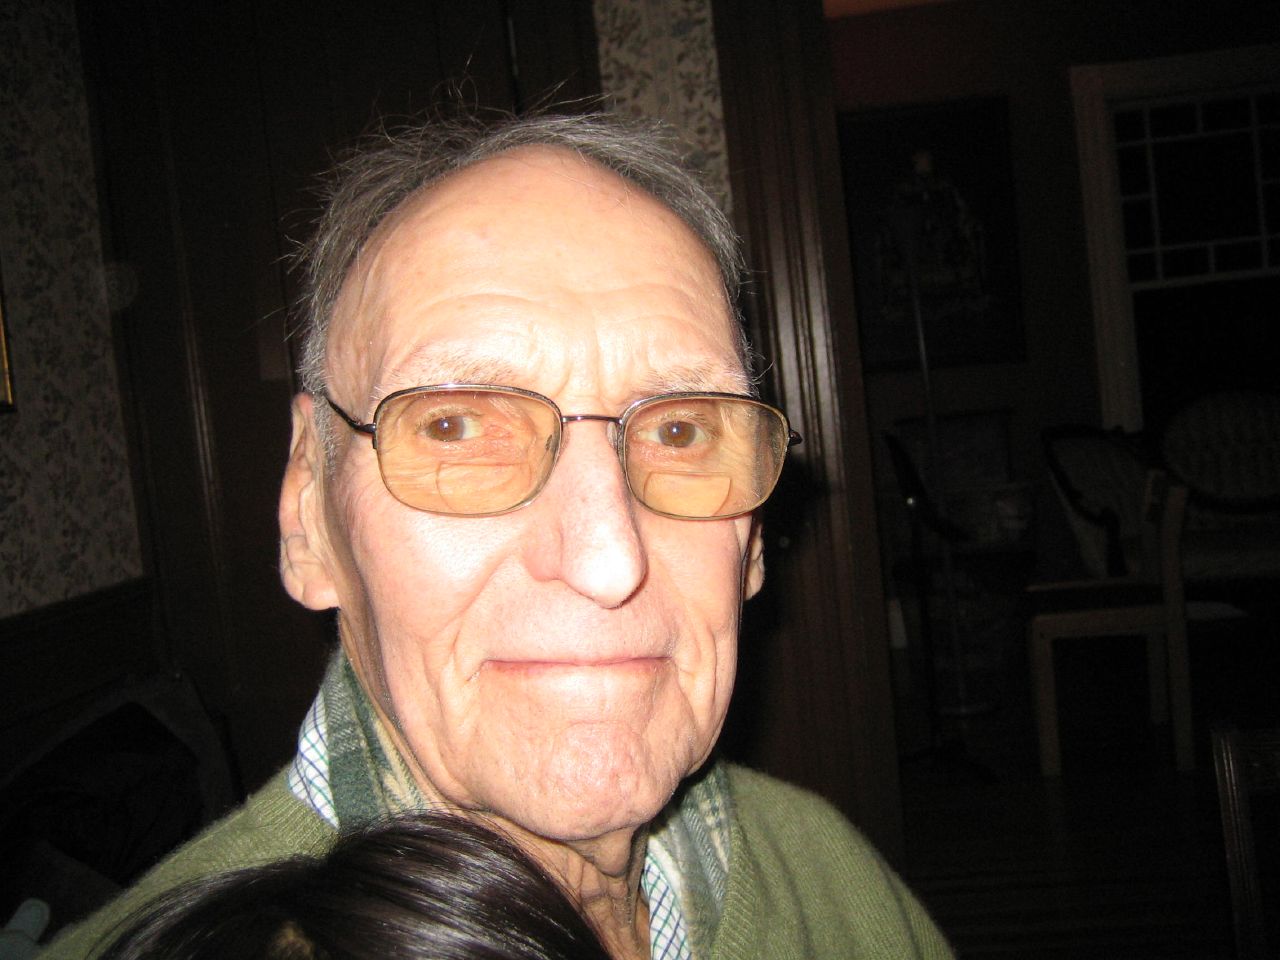 an older man wearing glasses is smiling at the camera